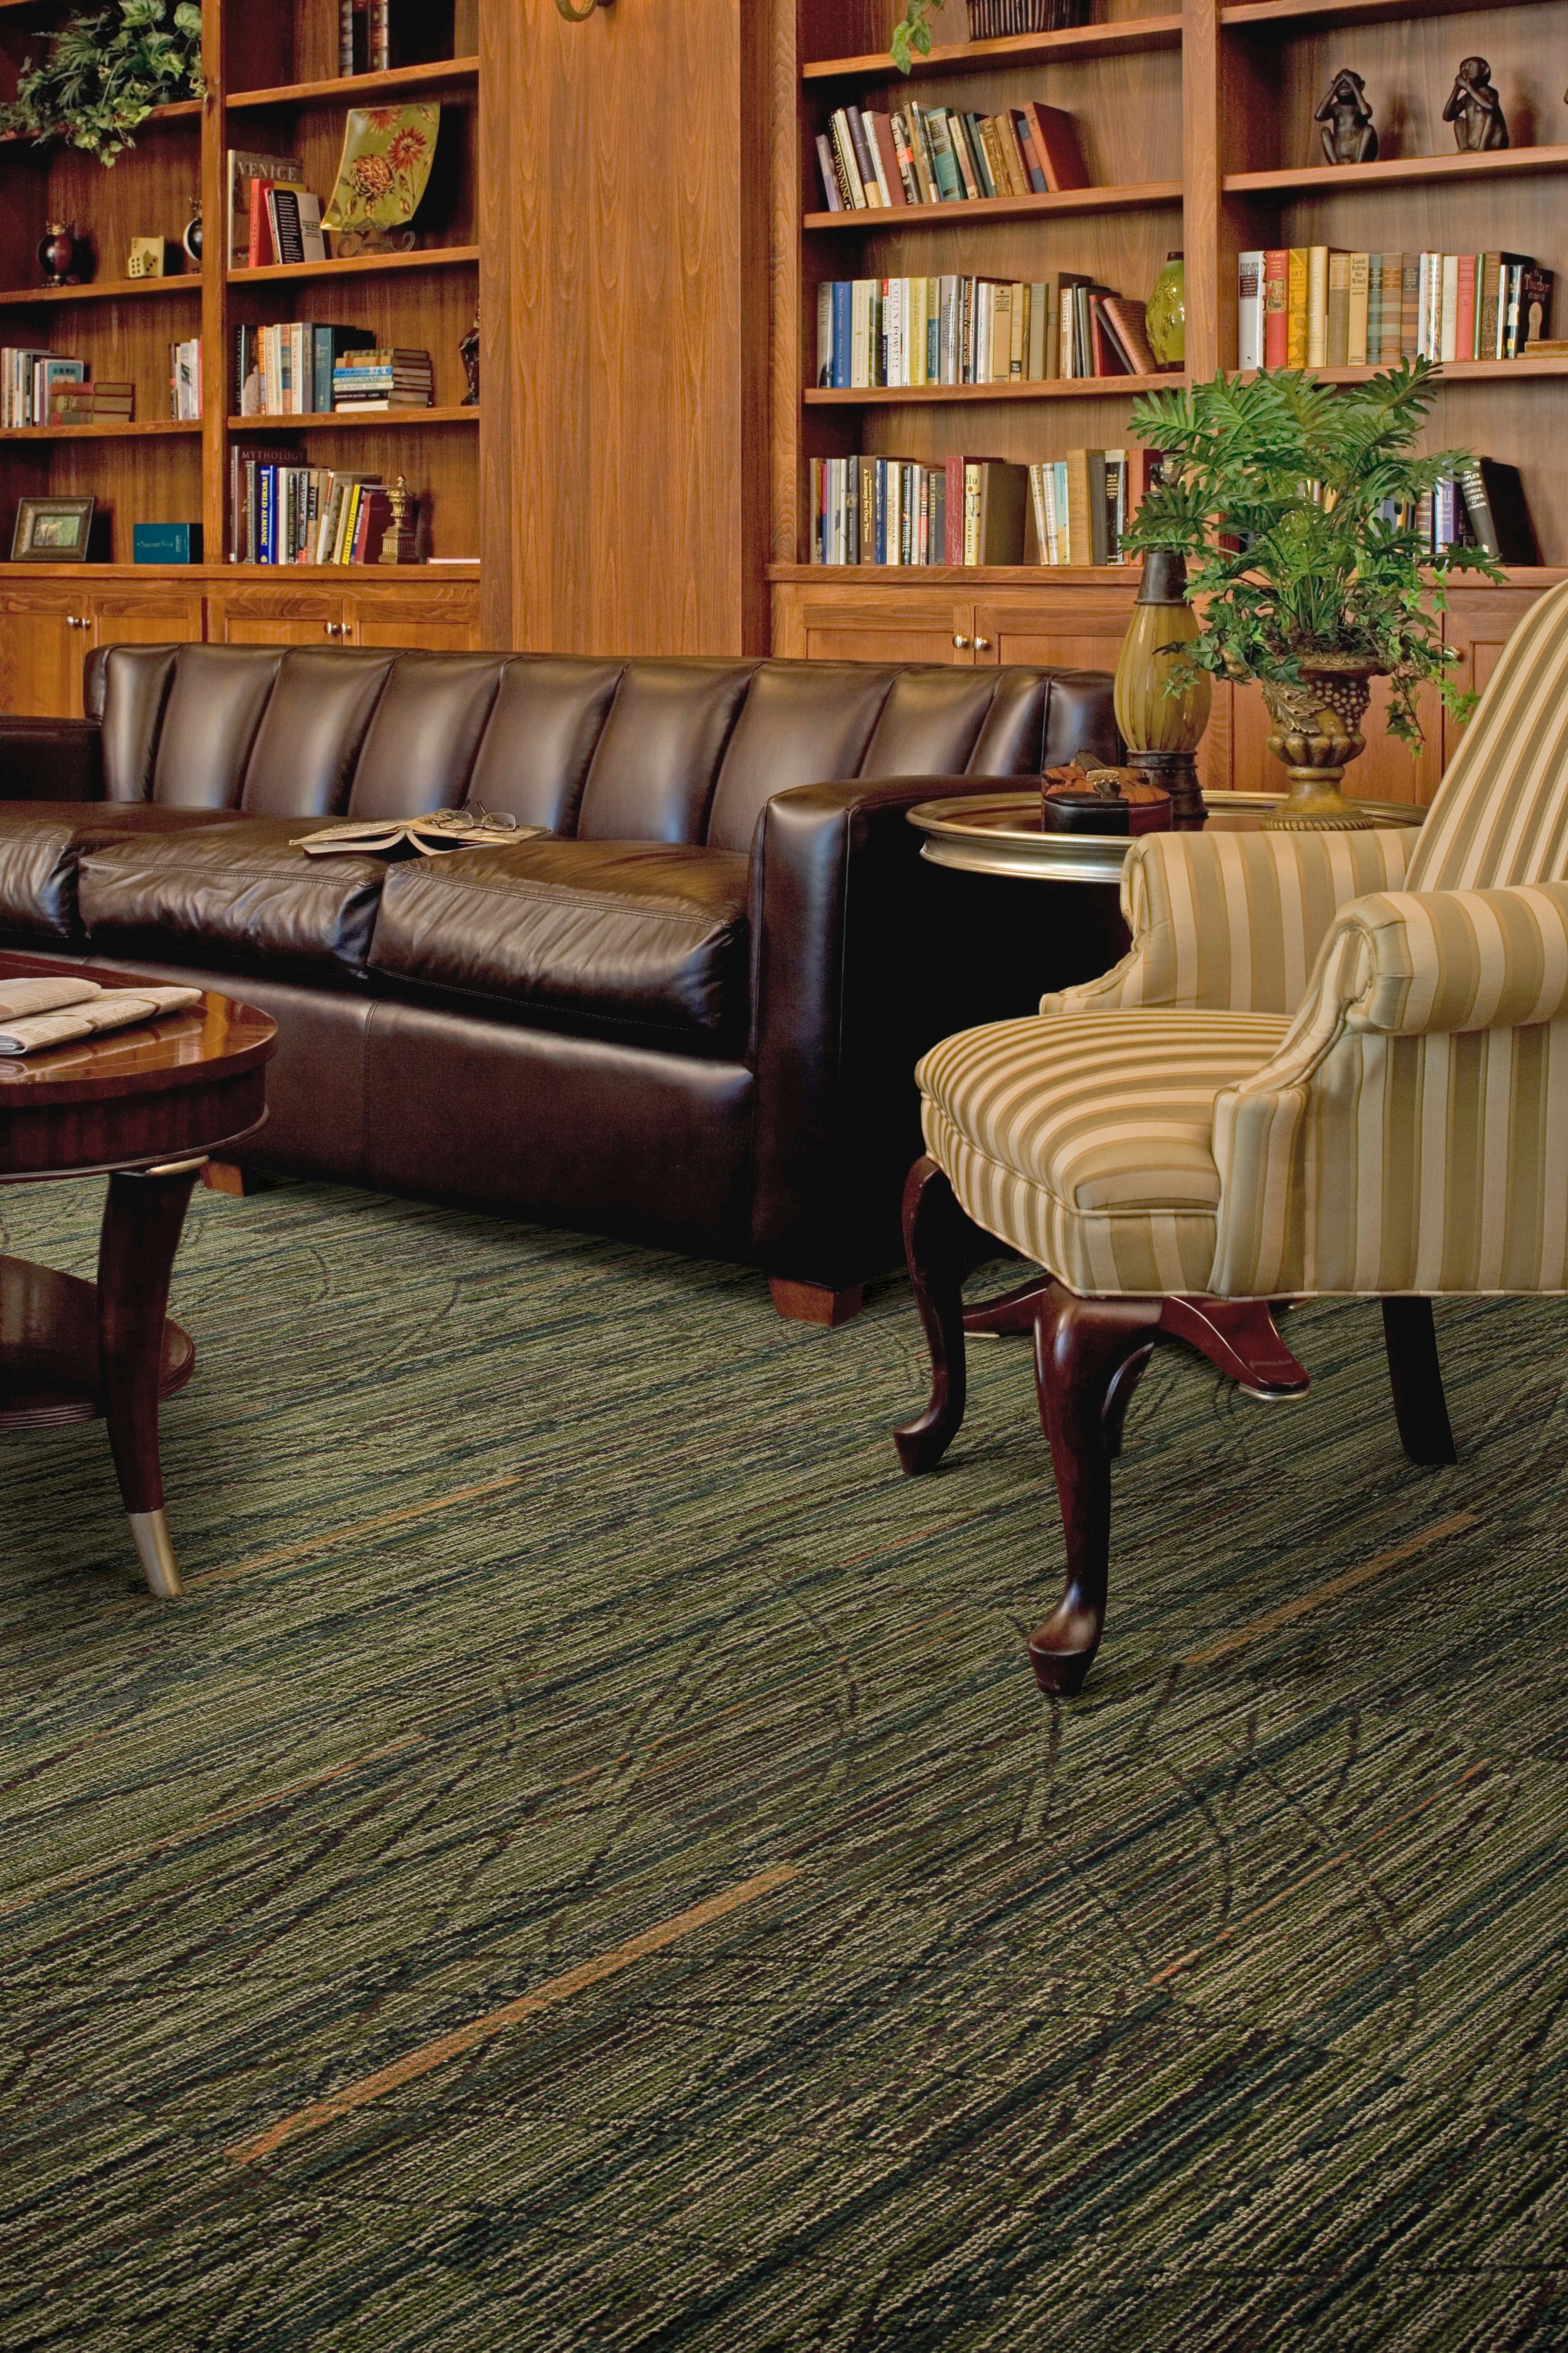 Interface Prairie Grass carpet tile in senior housing seating area with leather sofa and bookshelves numéro d’image 10